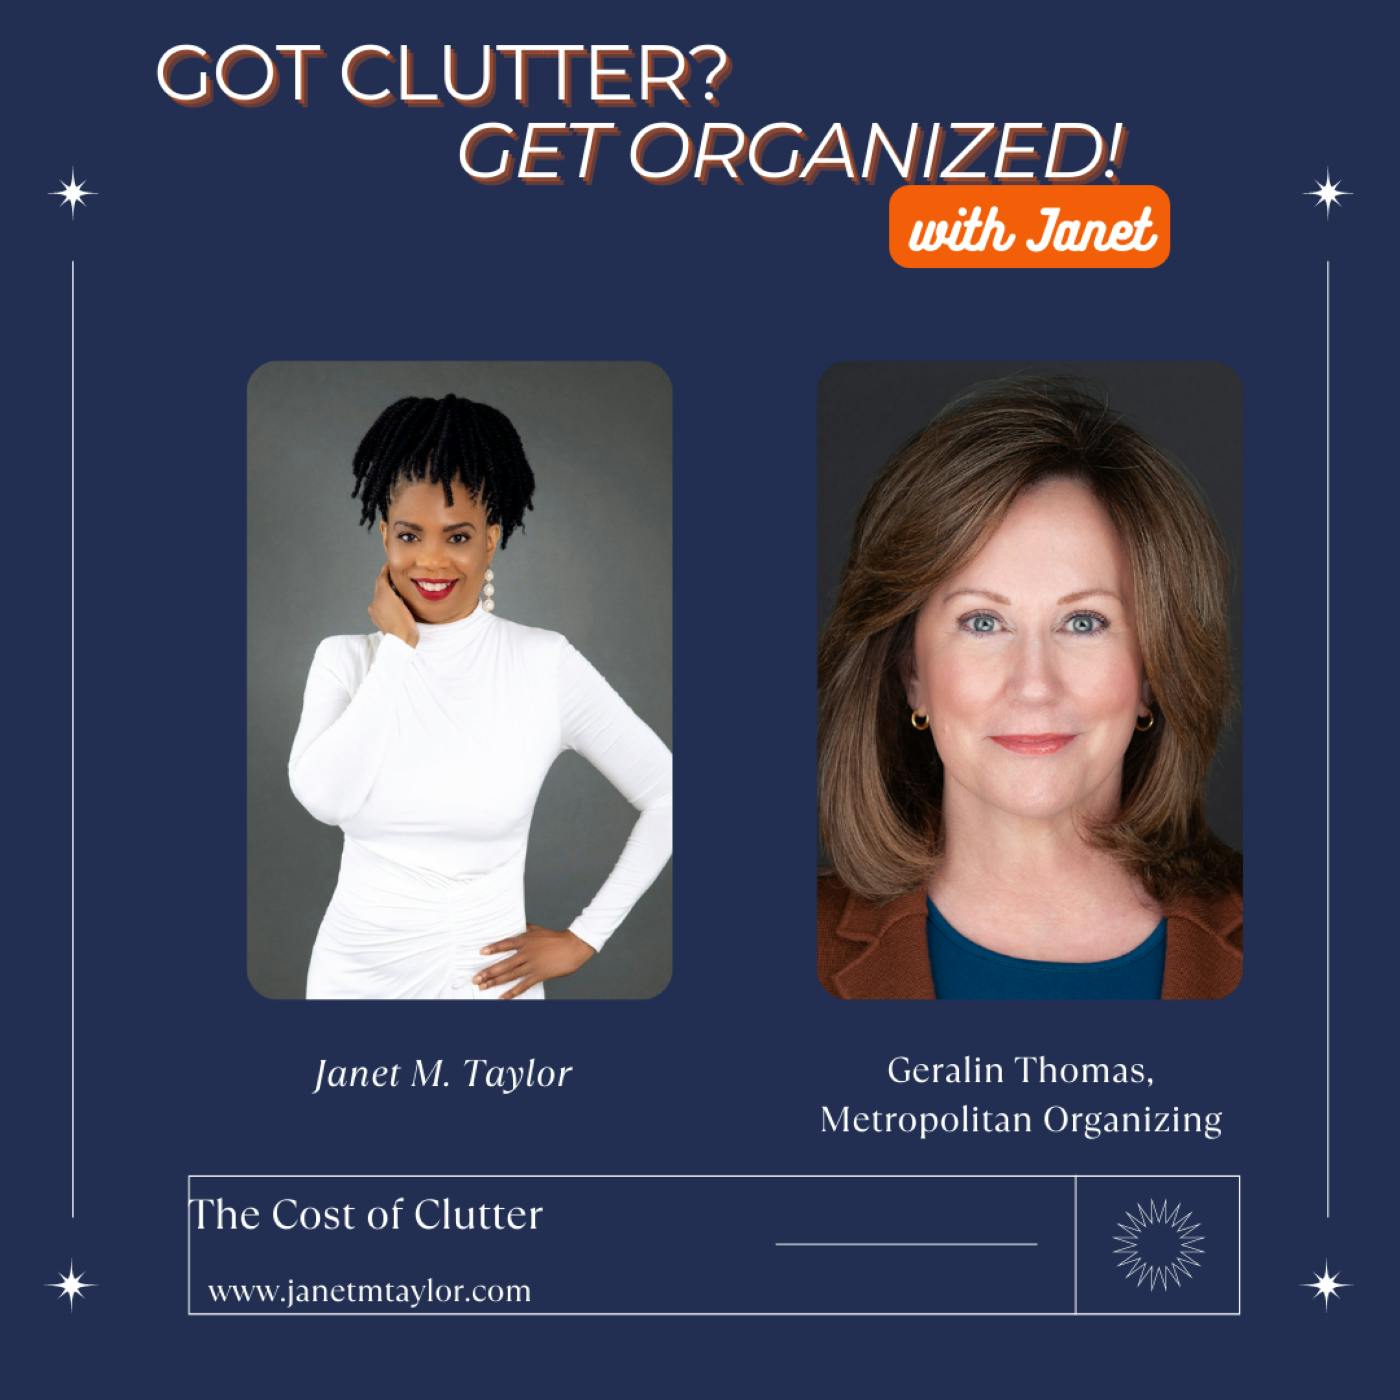 The Cost of Clutter with Geralin Thomas, Metropolitan Organizing